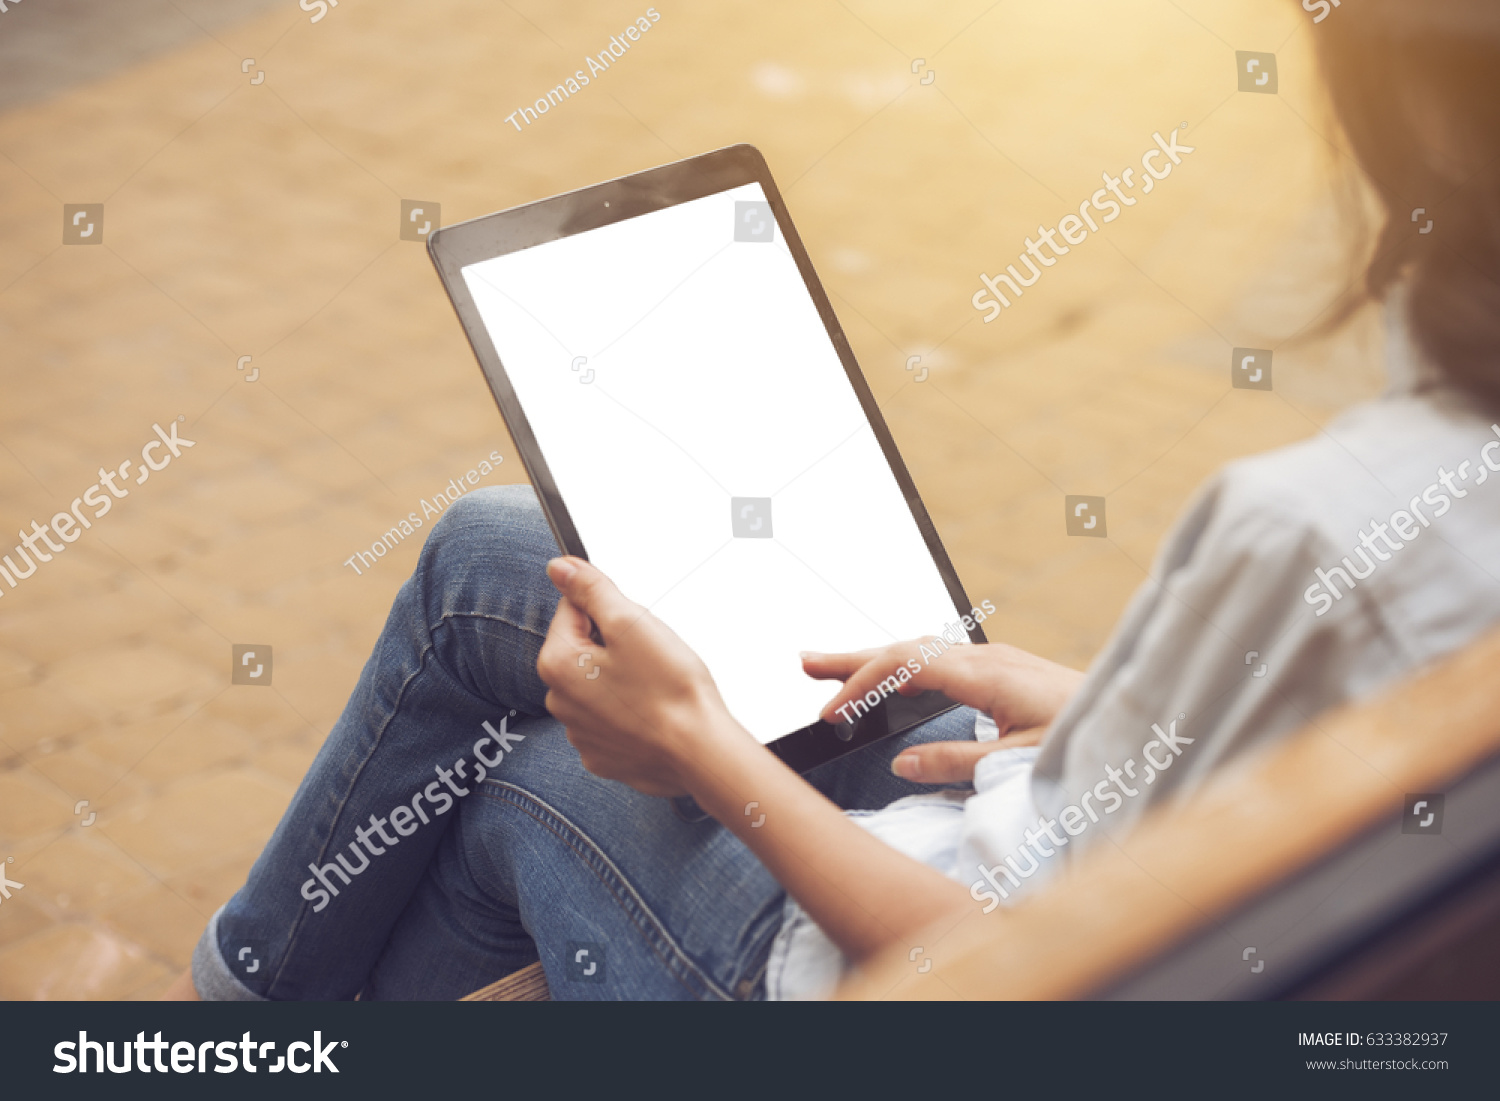 close up on a white blank screen tablet pc in female hands, mockup #633382937